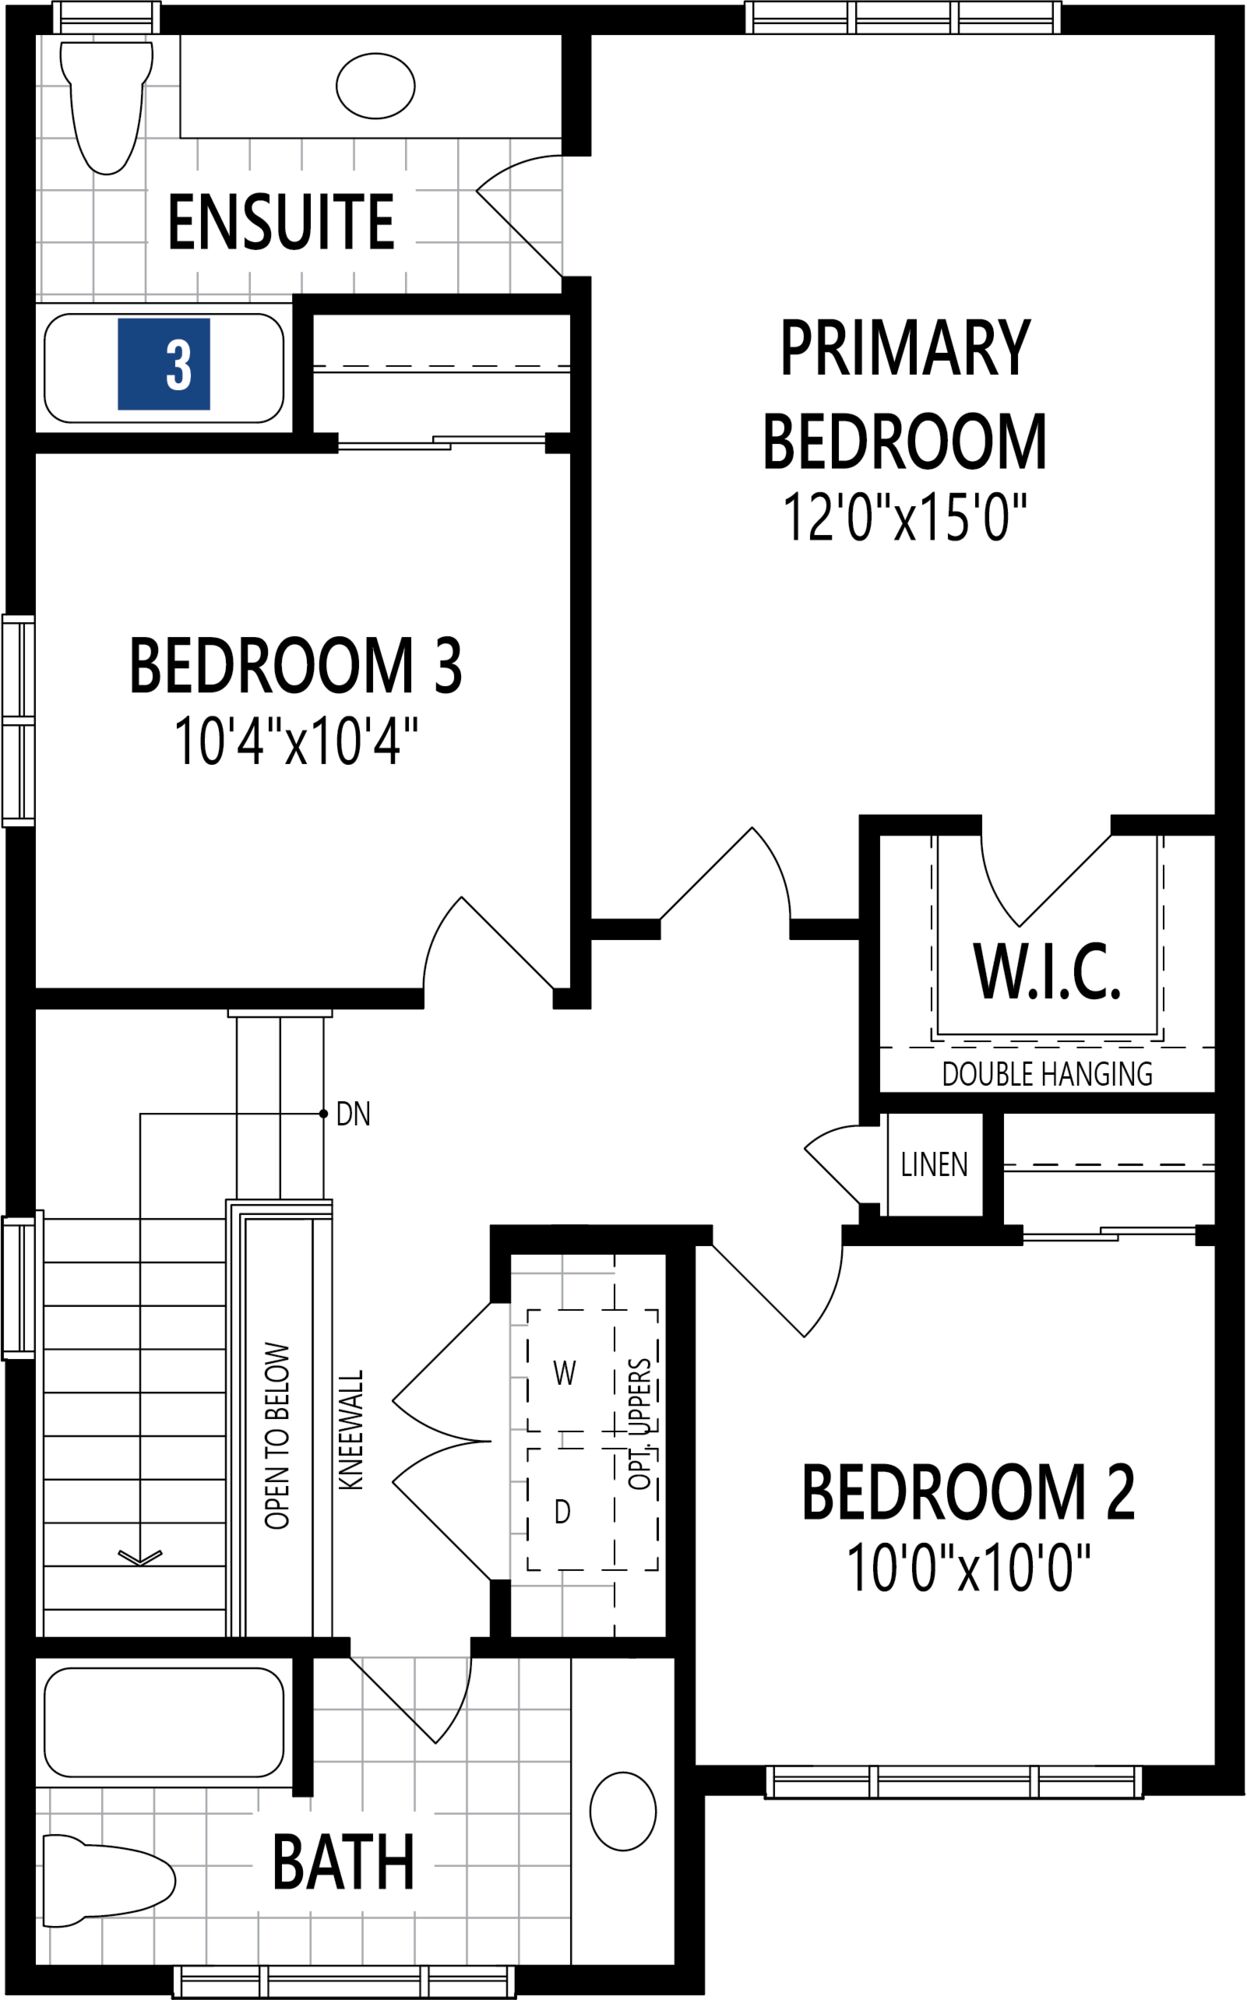 Broadleaf Floor Plan of Half Moon Bay Towns with undefined beds